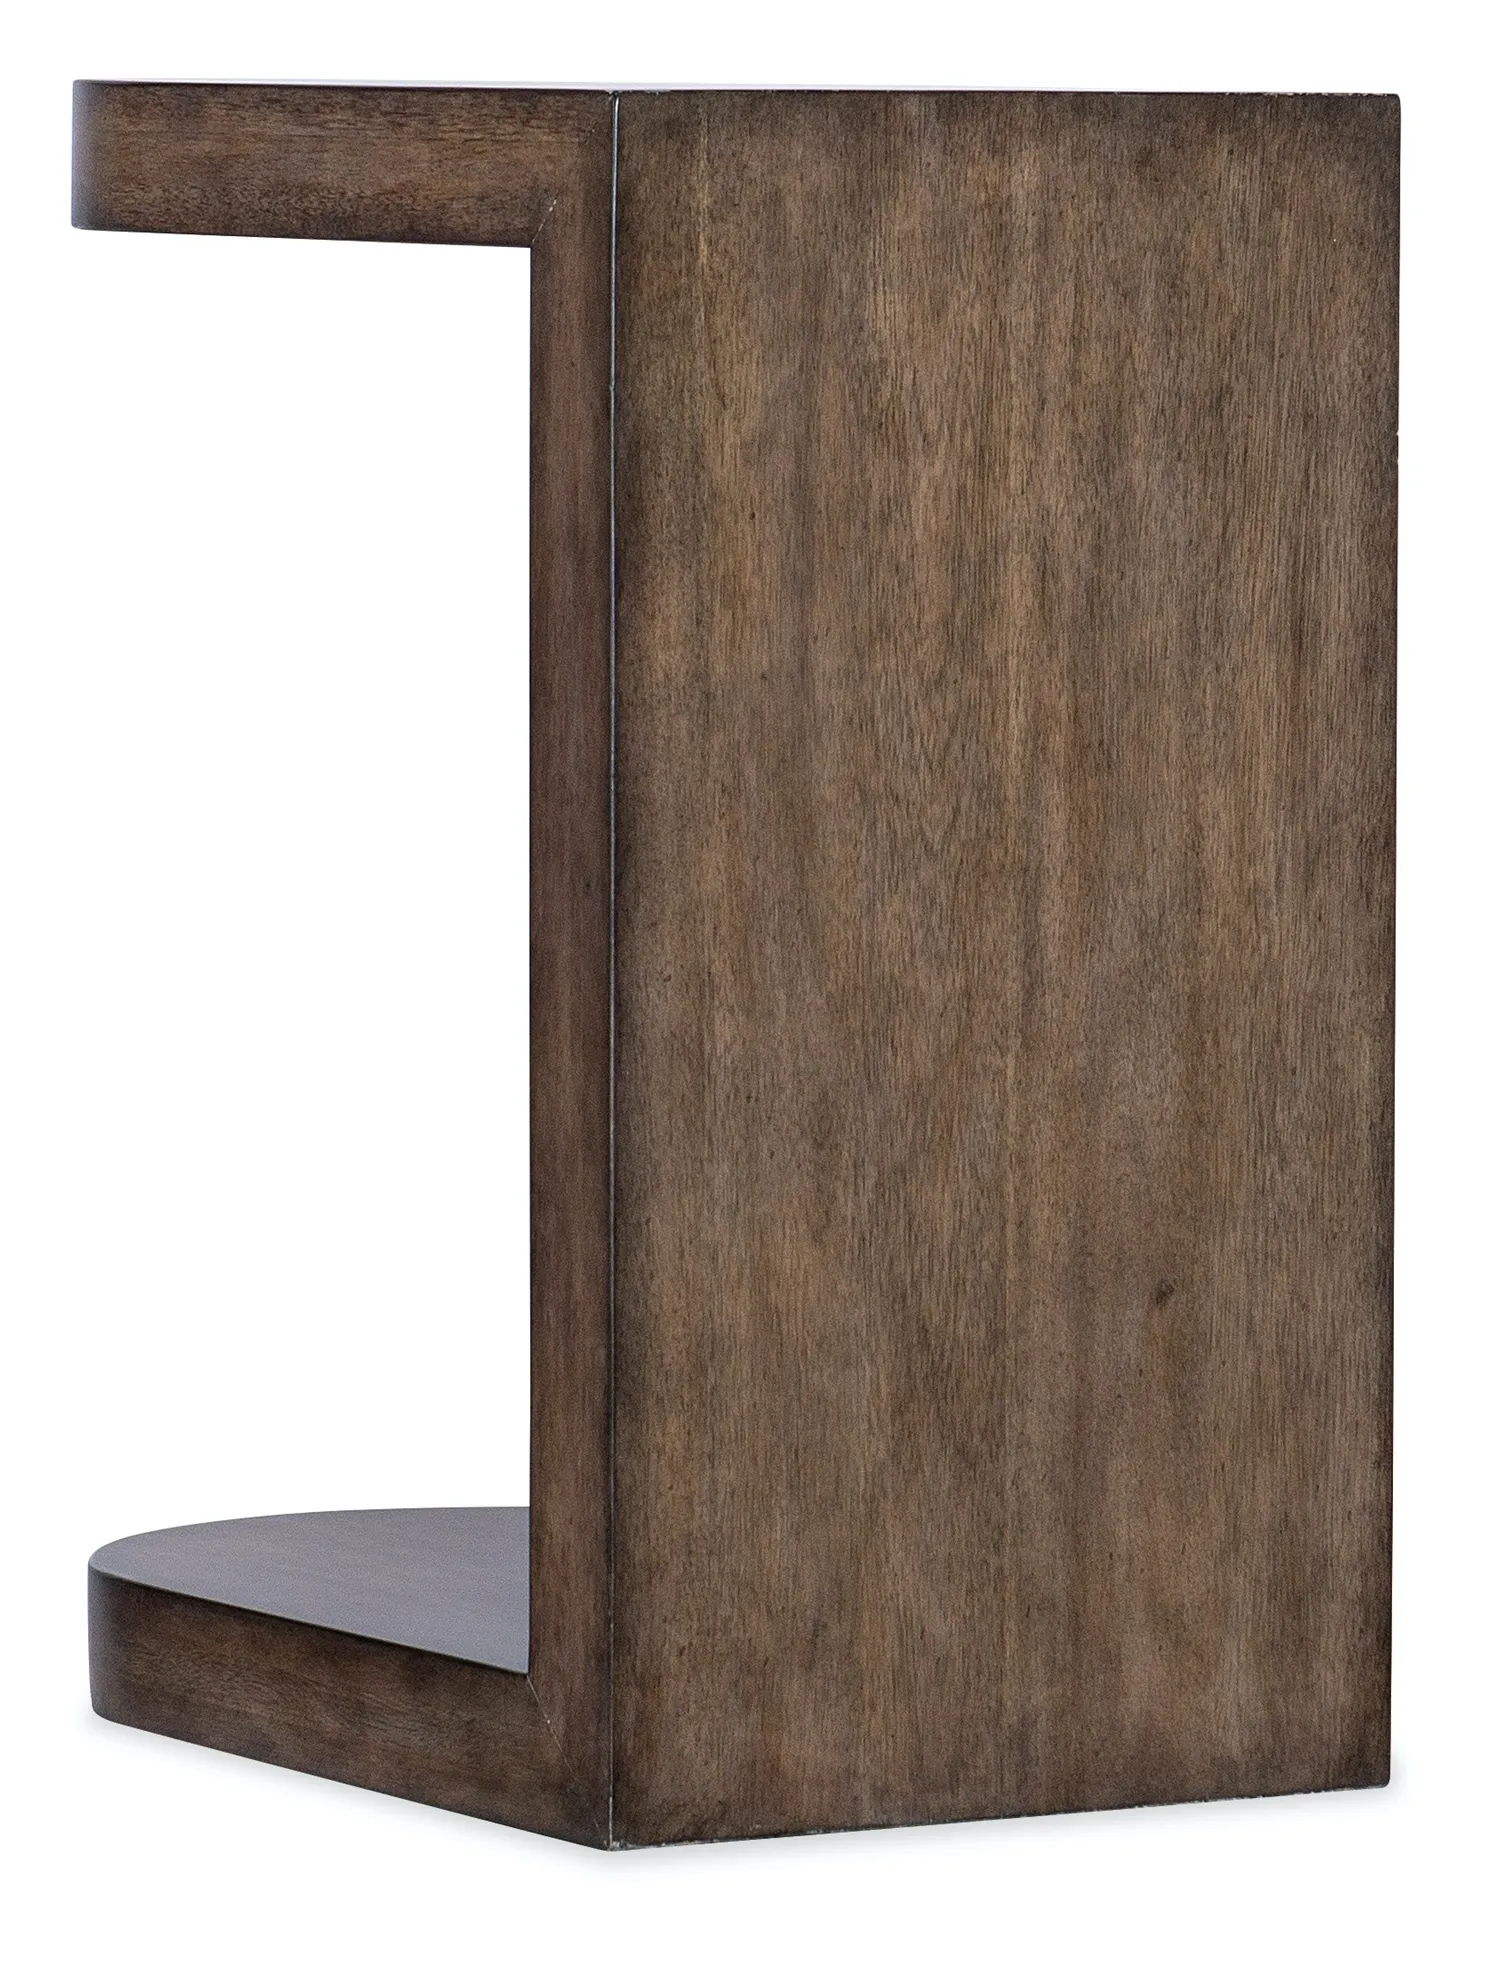 COMMERCE & MARKET NATURAL WOOD ACCENT C-TABLE